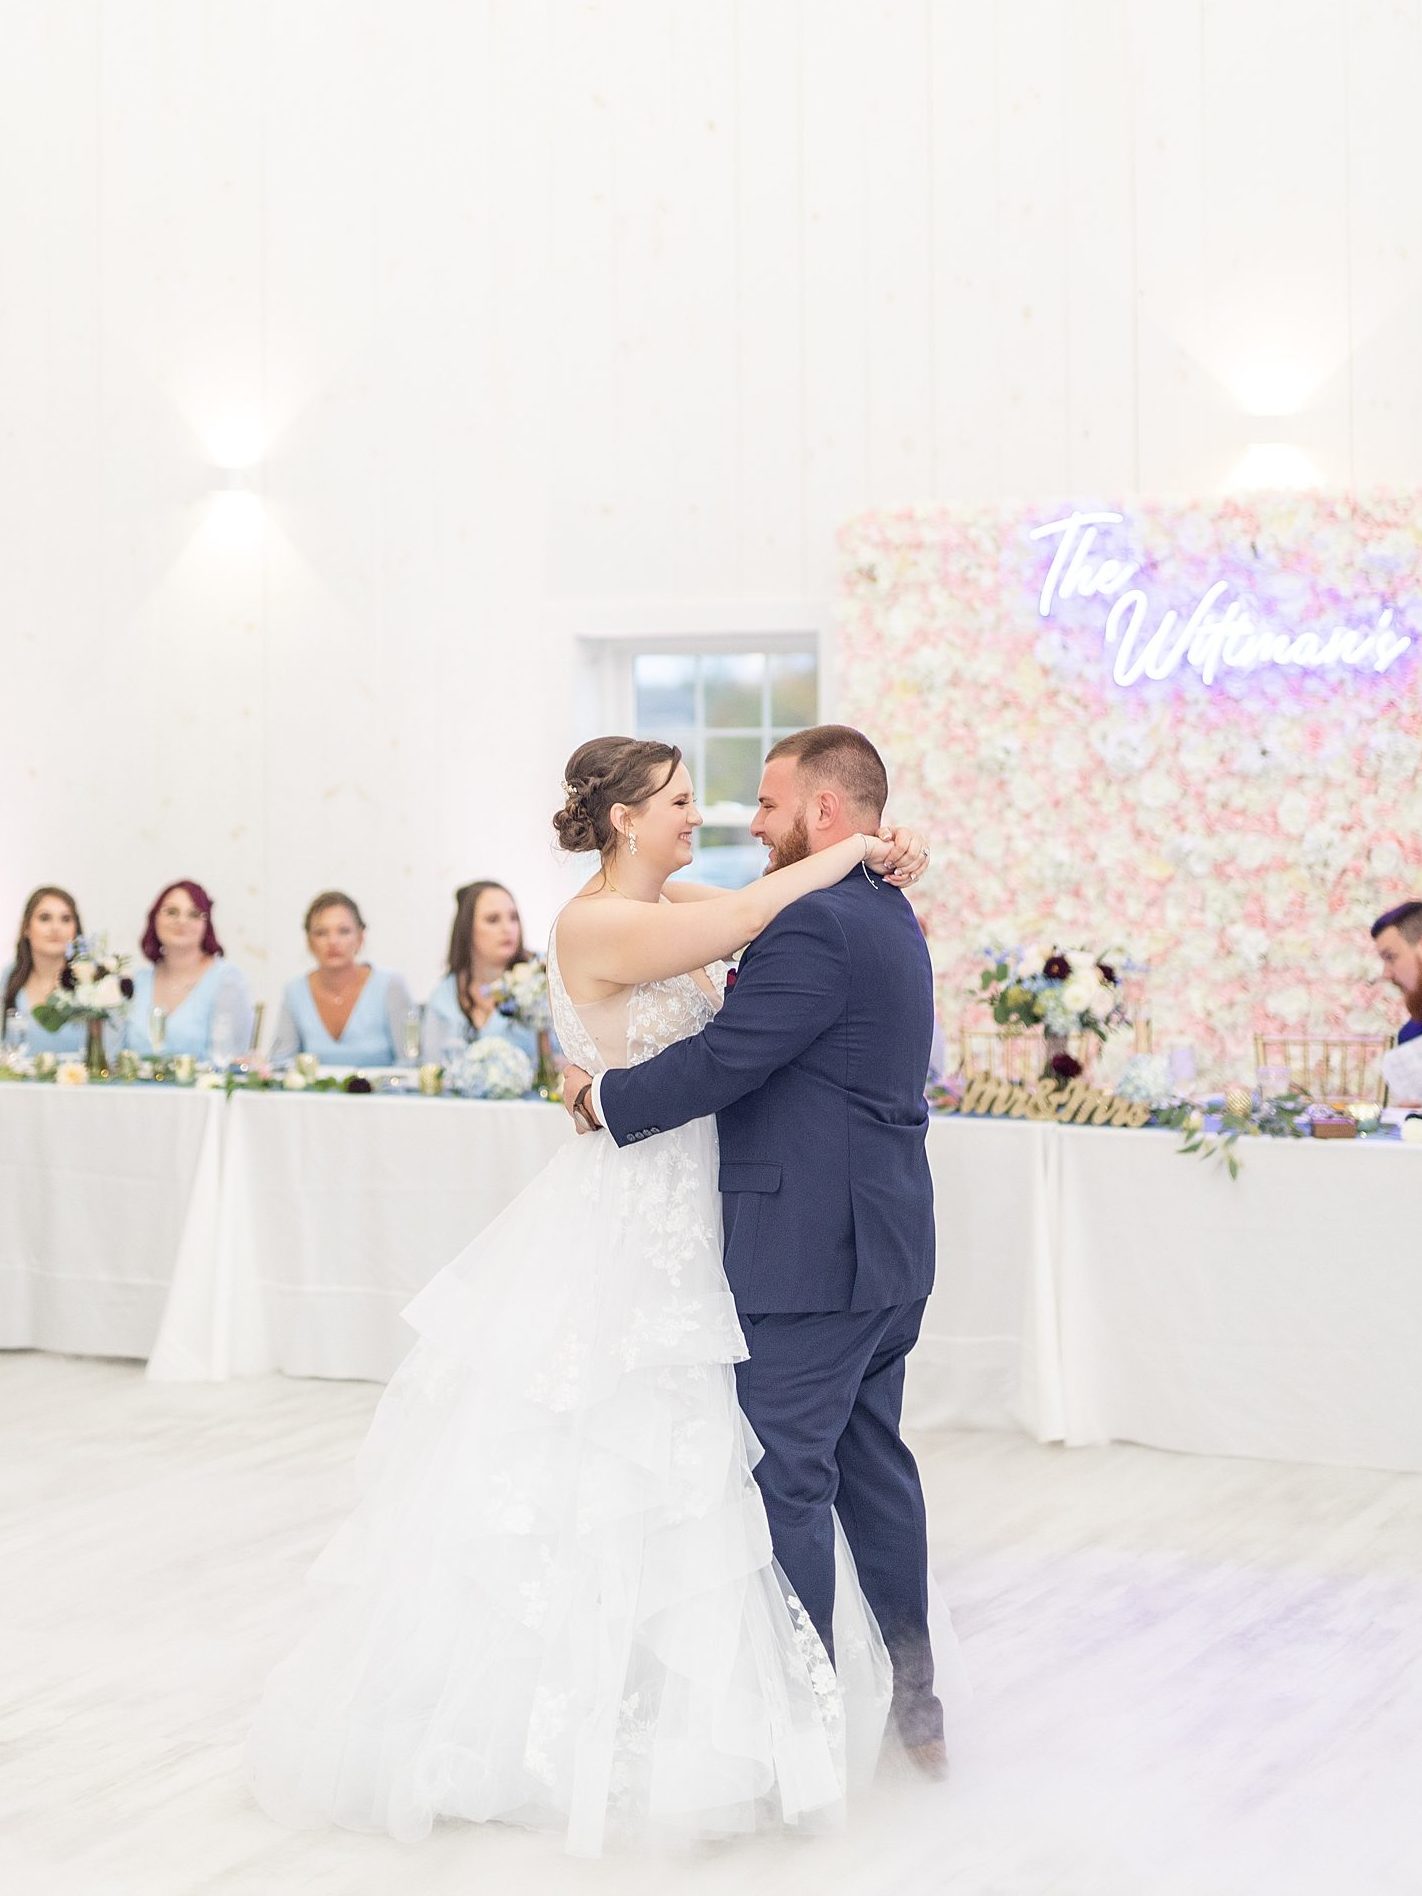 First dance photo of bride and groom during wedding reception at White Rose Barn wedding venue by wedding photographer, Bree Thompson, of Sherr Weddings.